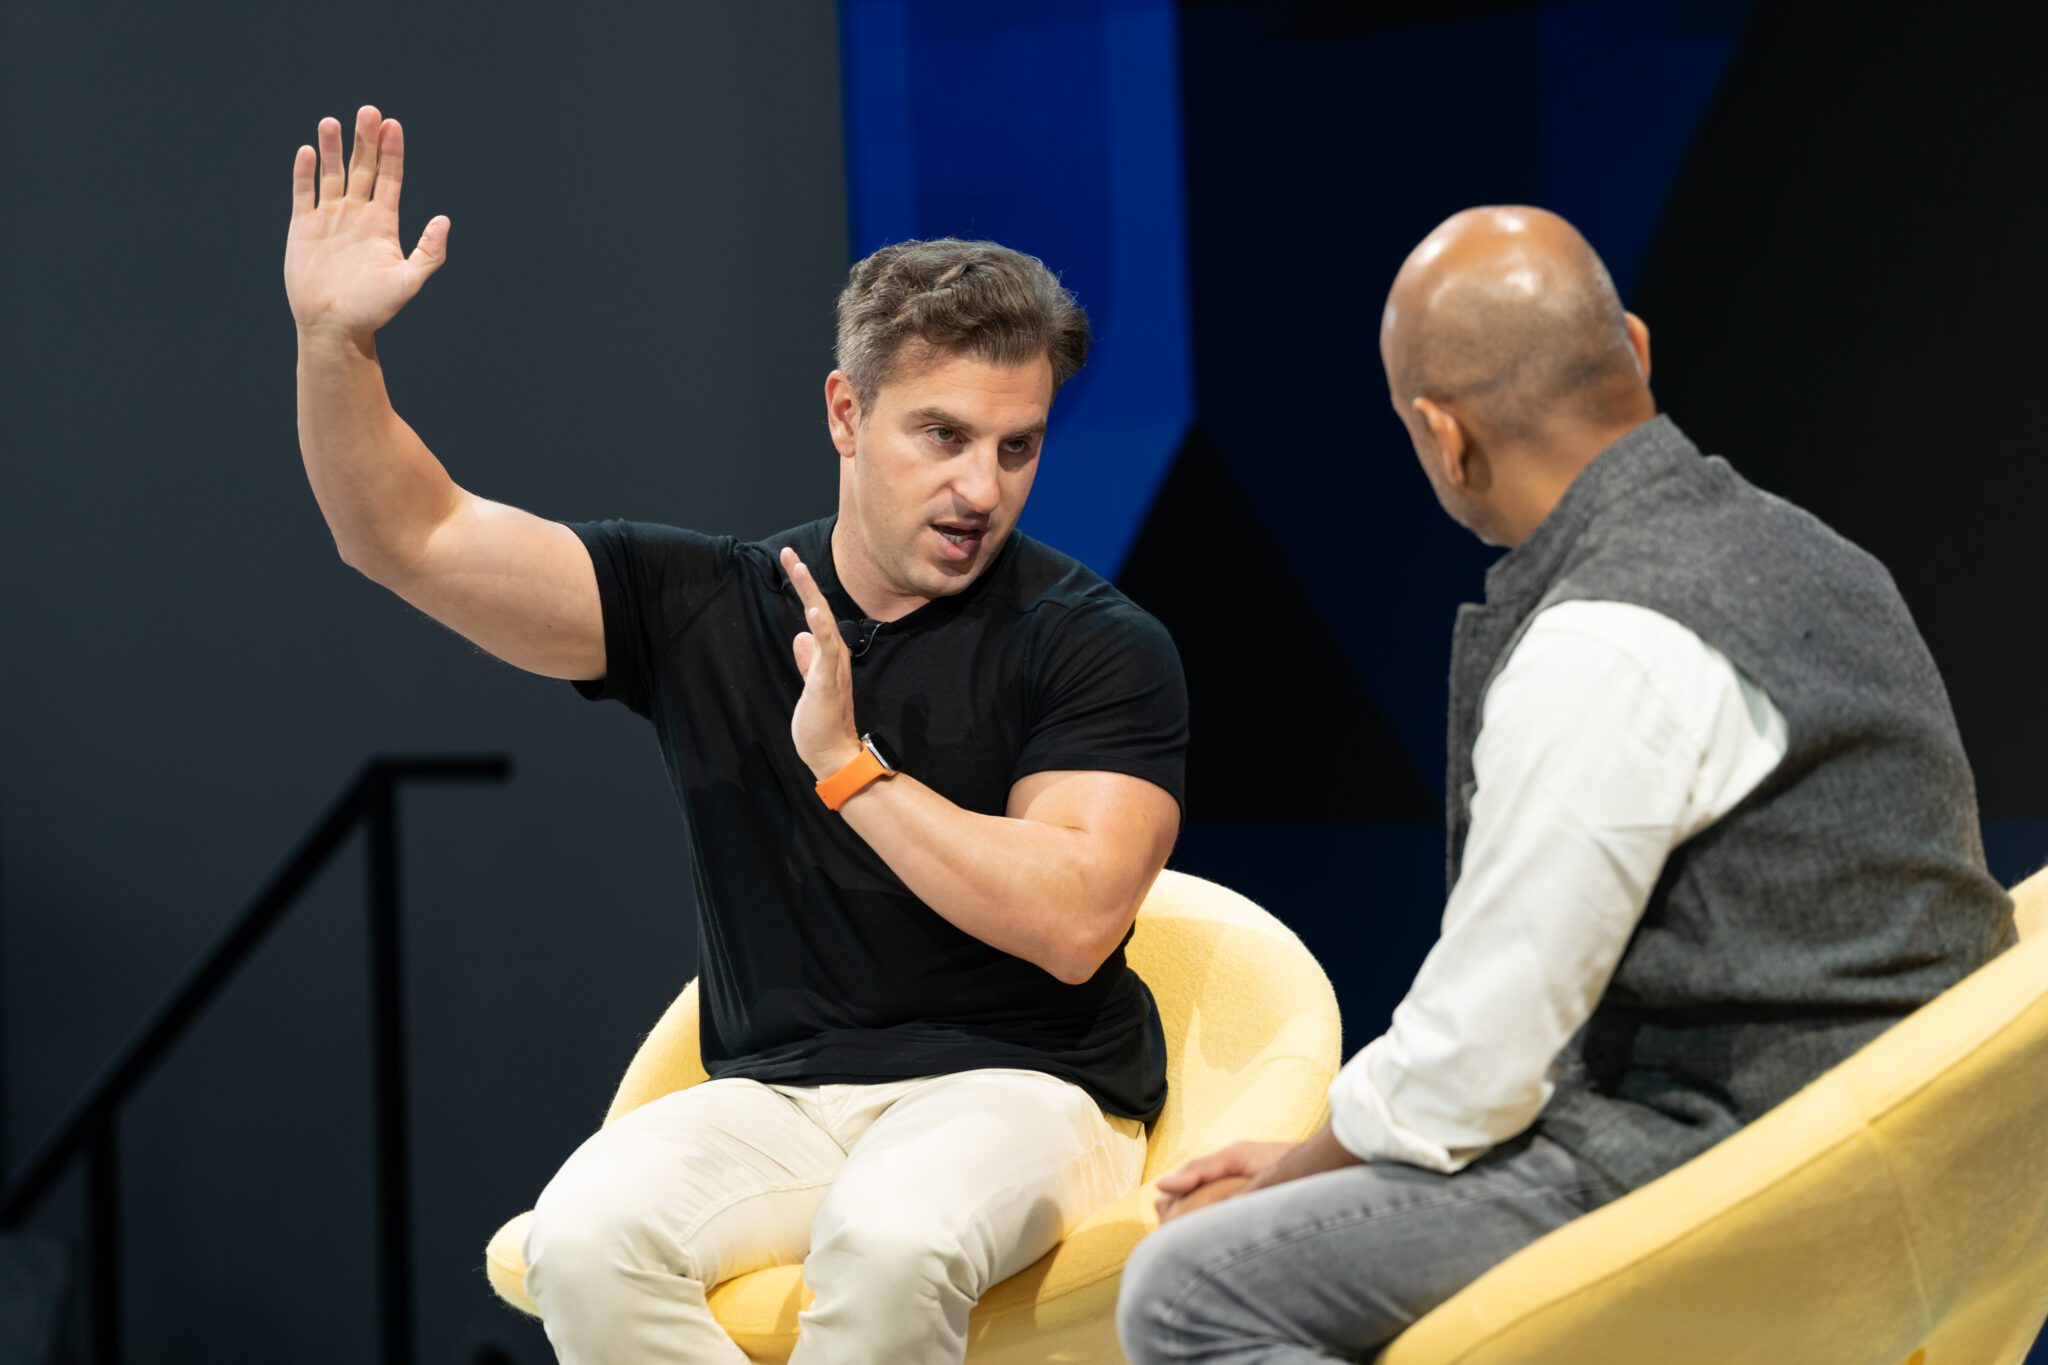 irbnb CEO Brian Chesky speaking with Skift CEO Rafat Ali at Skift Global Forum in NYC in September 2022. Source: Skift